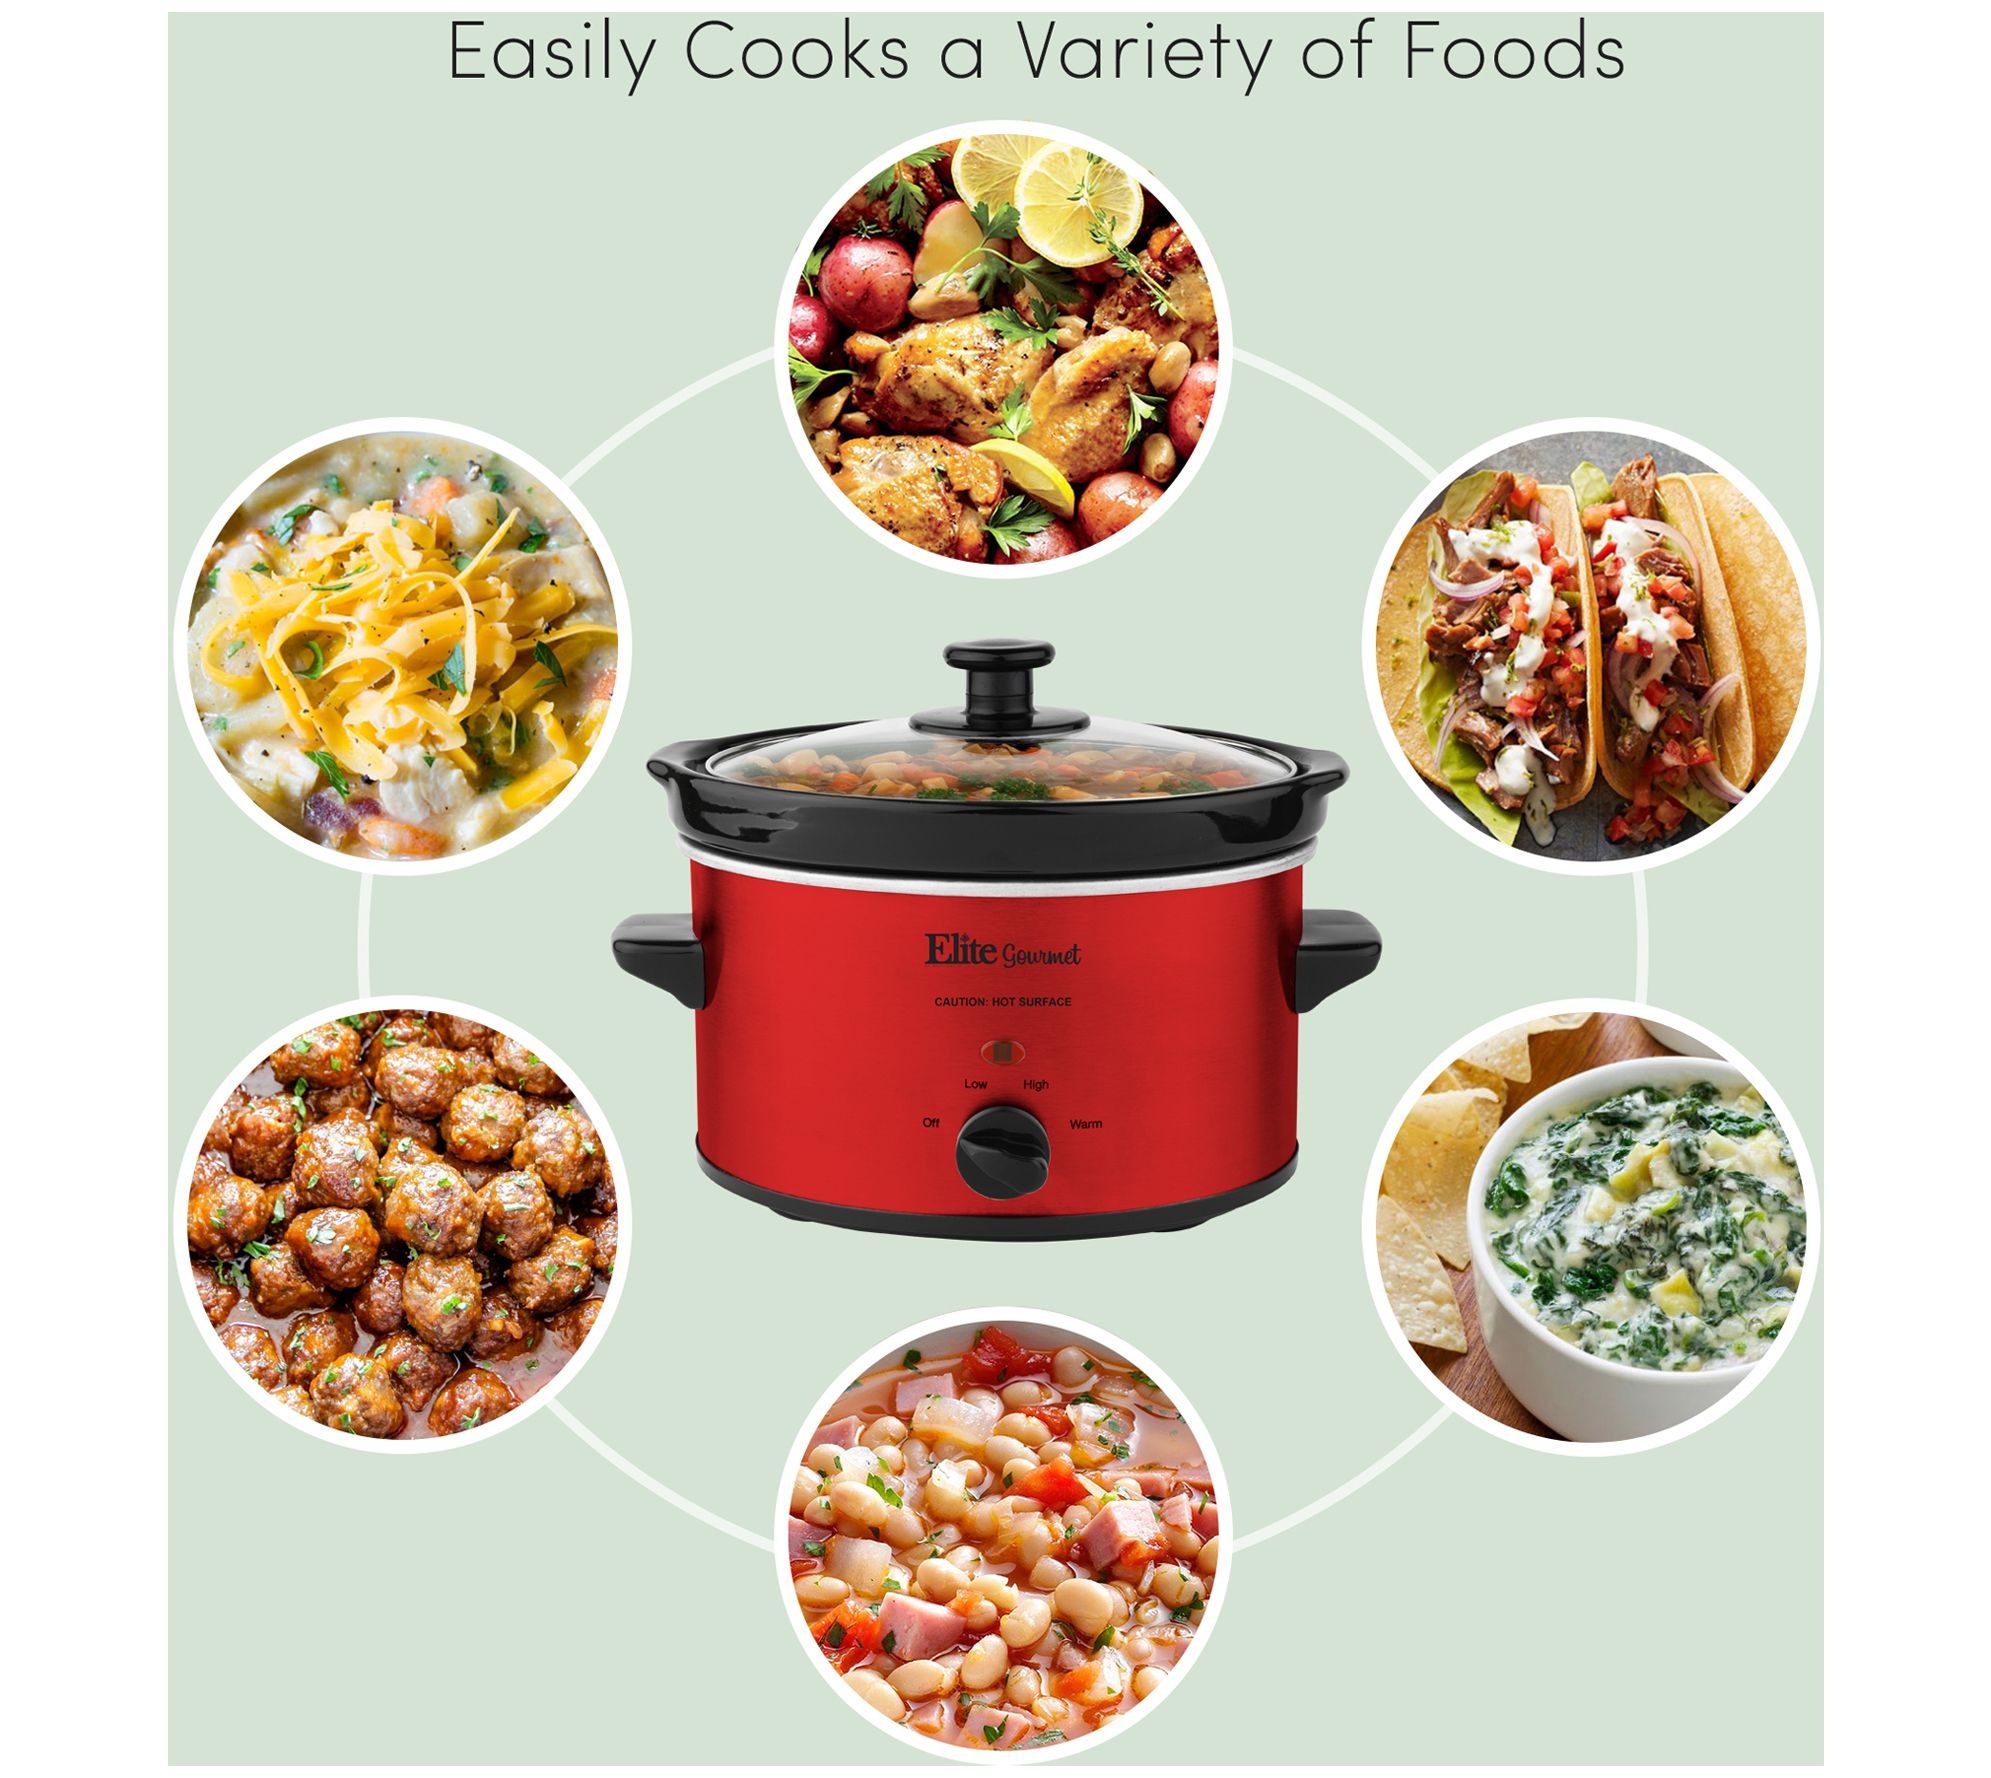 Elite Platinum Slow Cooker, Red Stainless Steel, 8.5 qt 